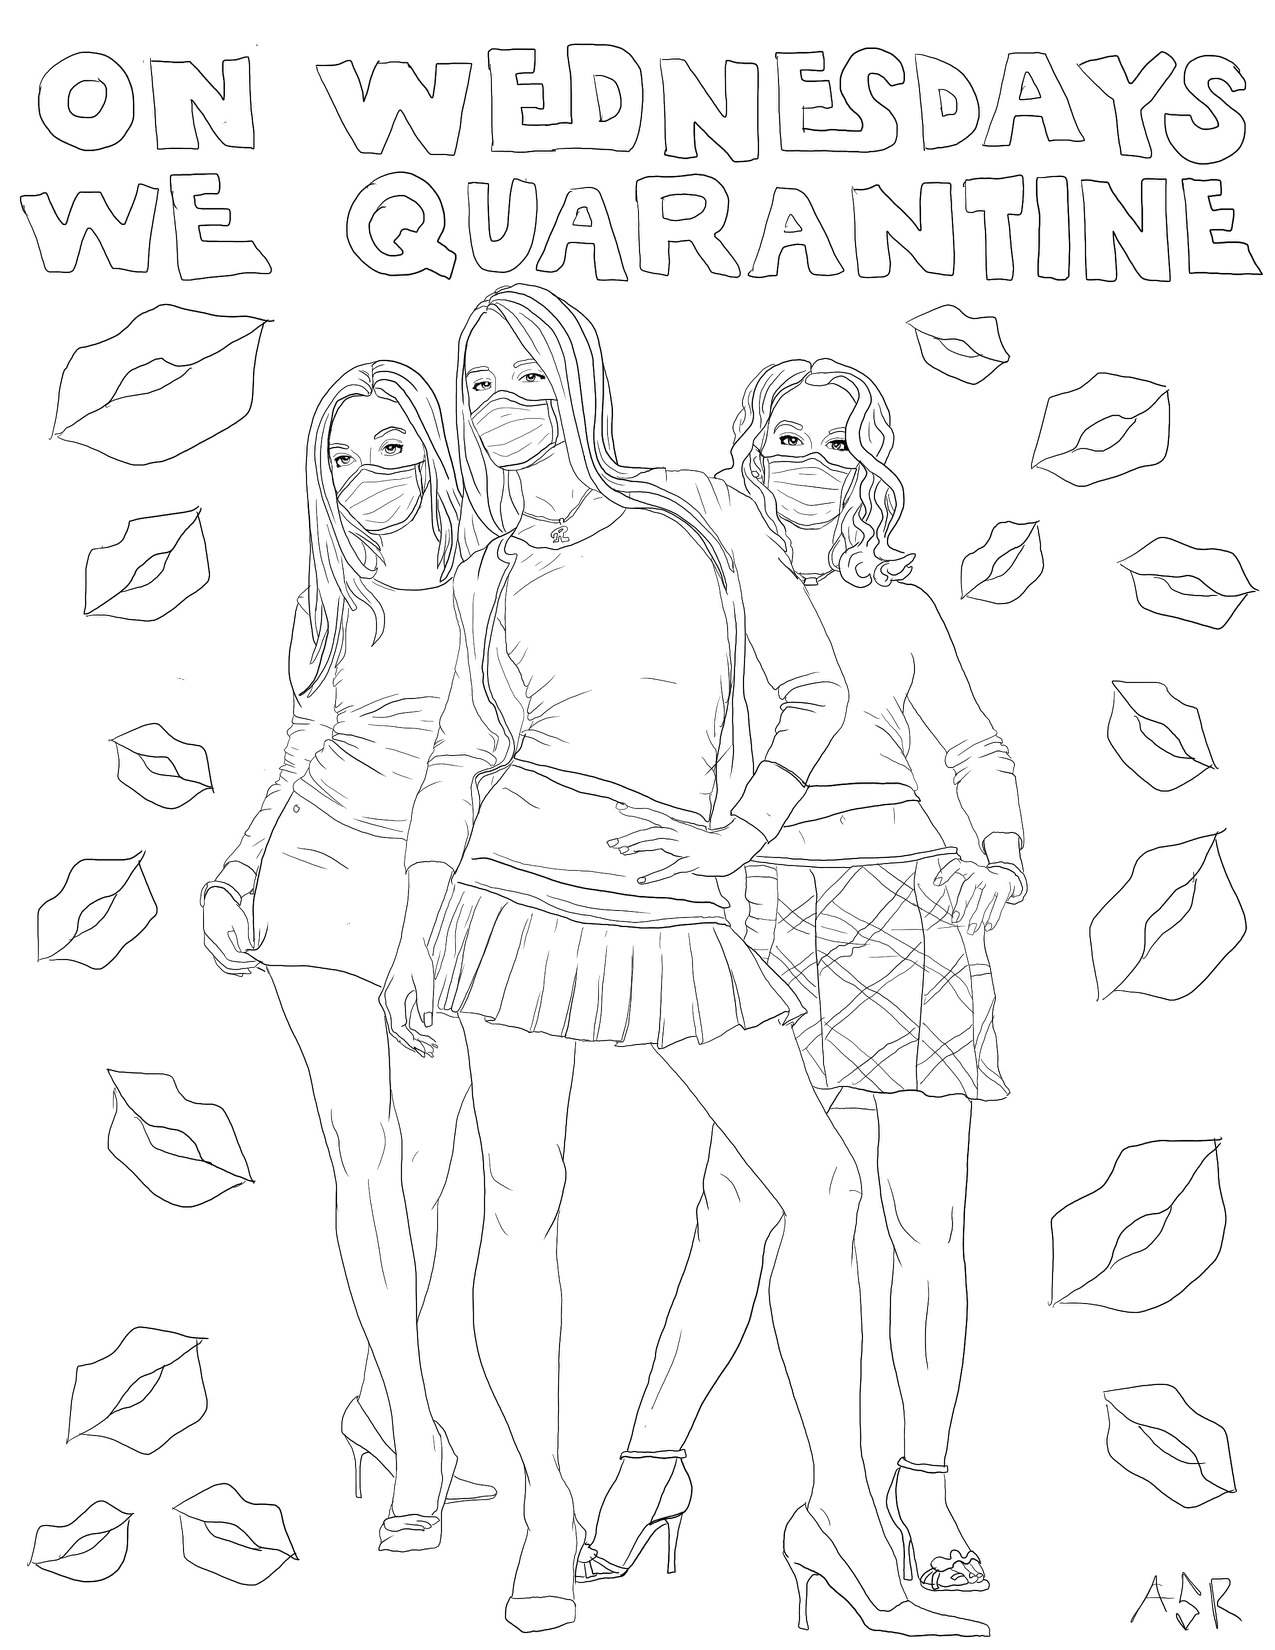 These Are The Best Quarantine Coloring Pages - Paste